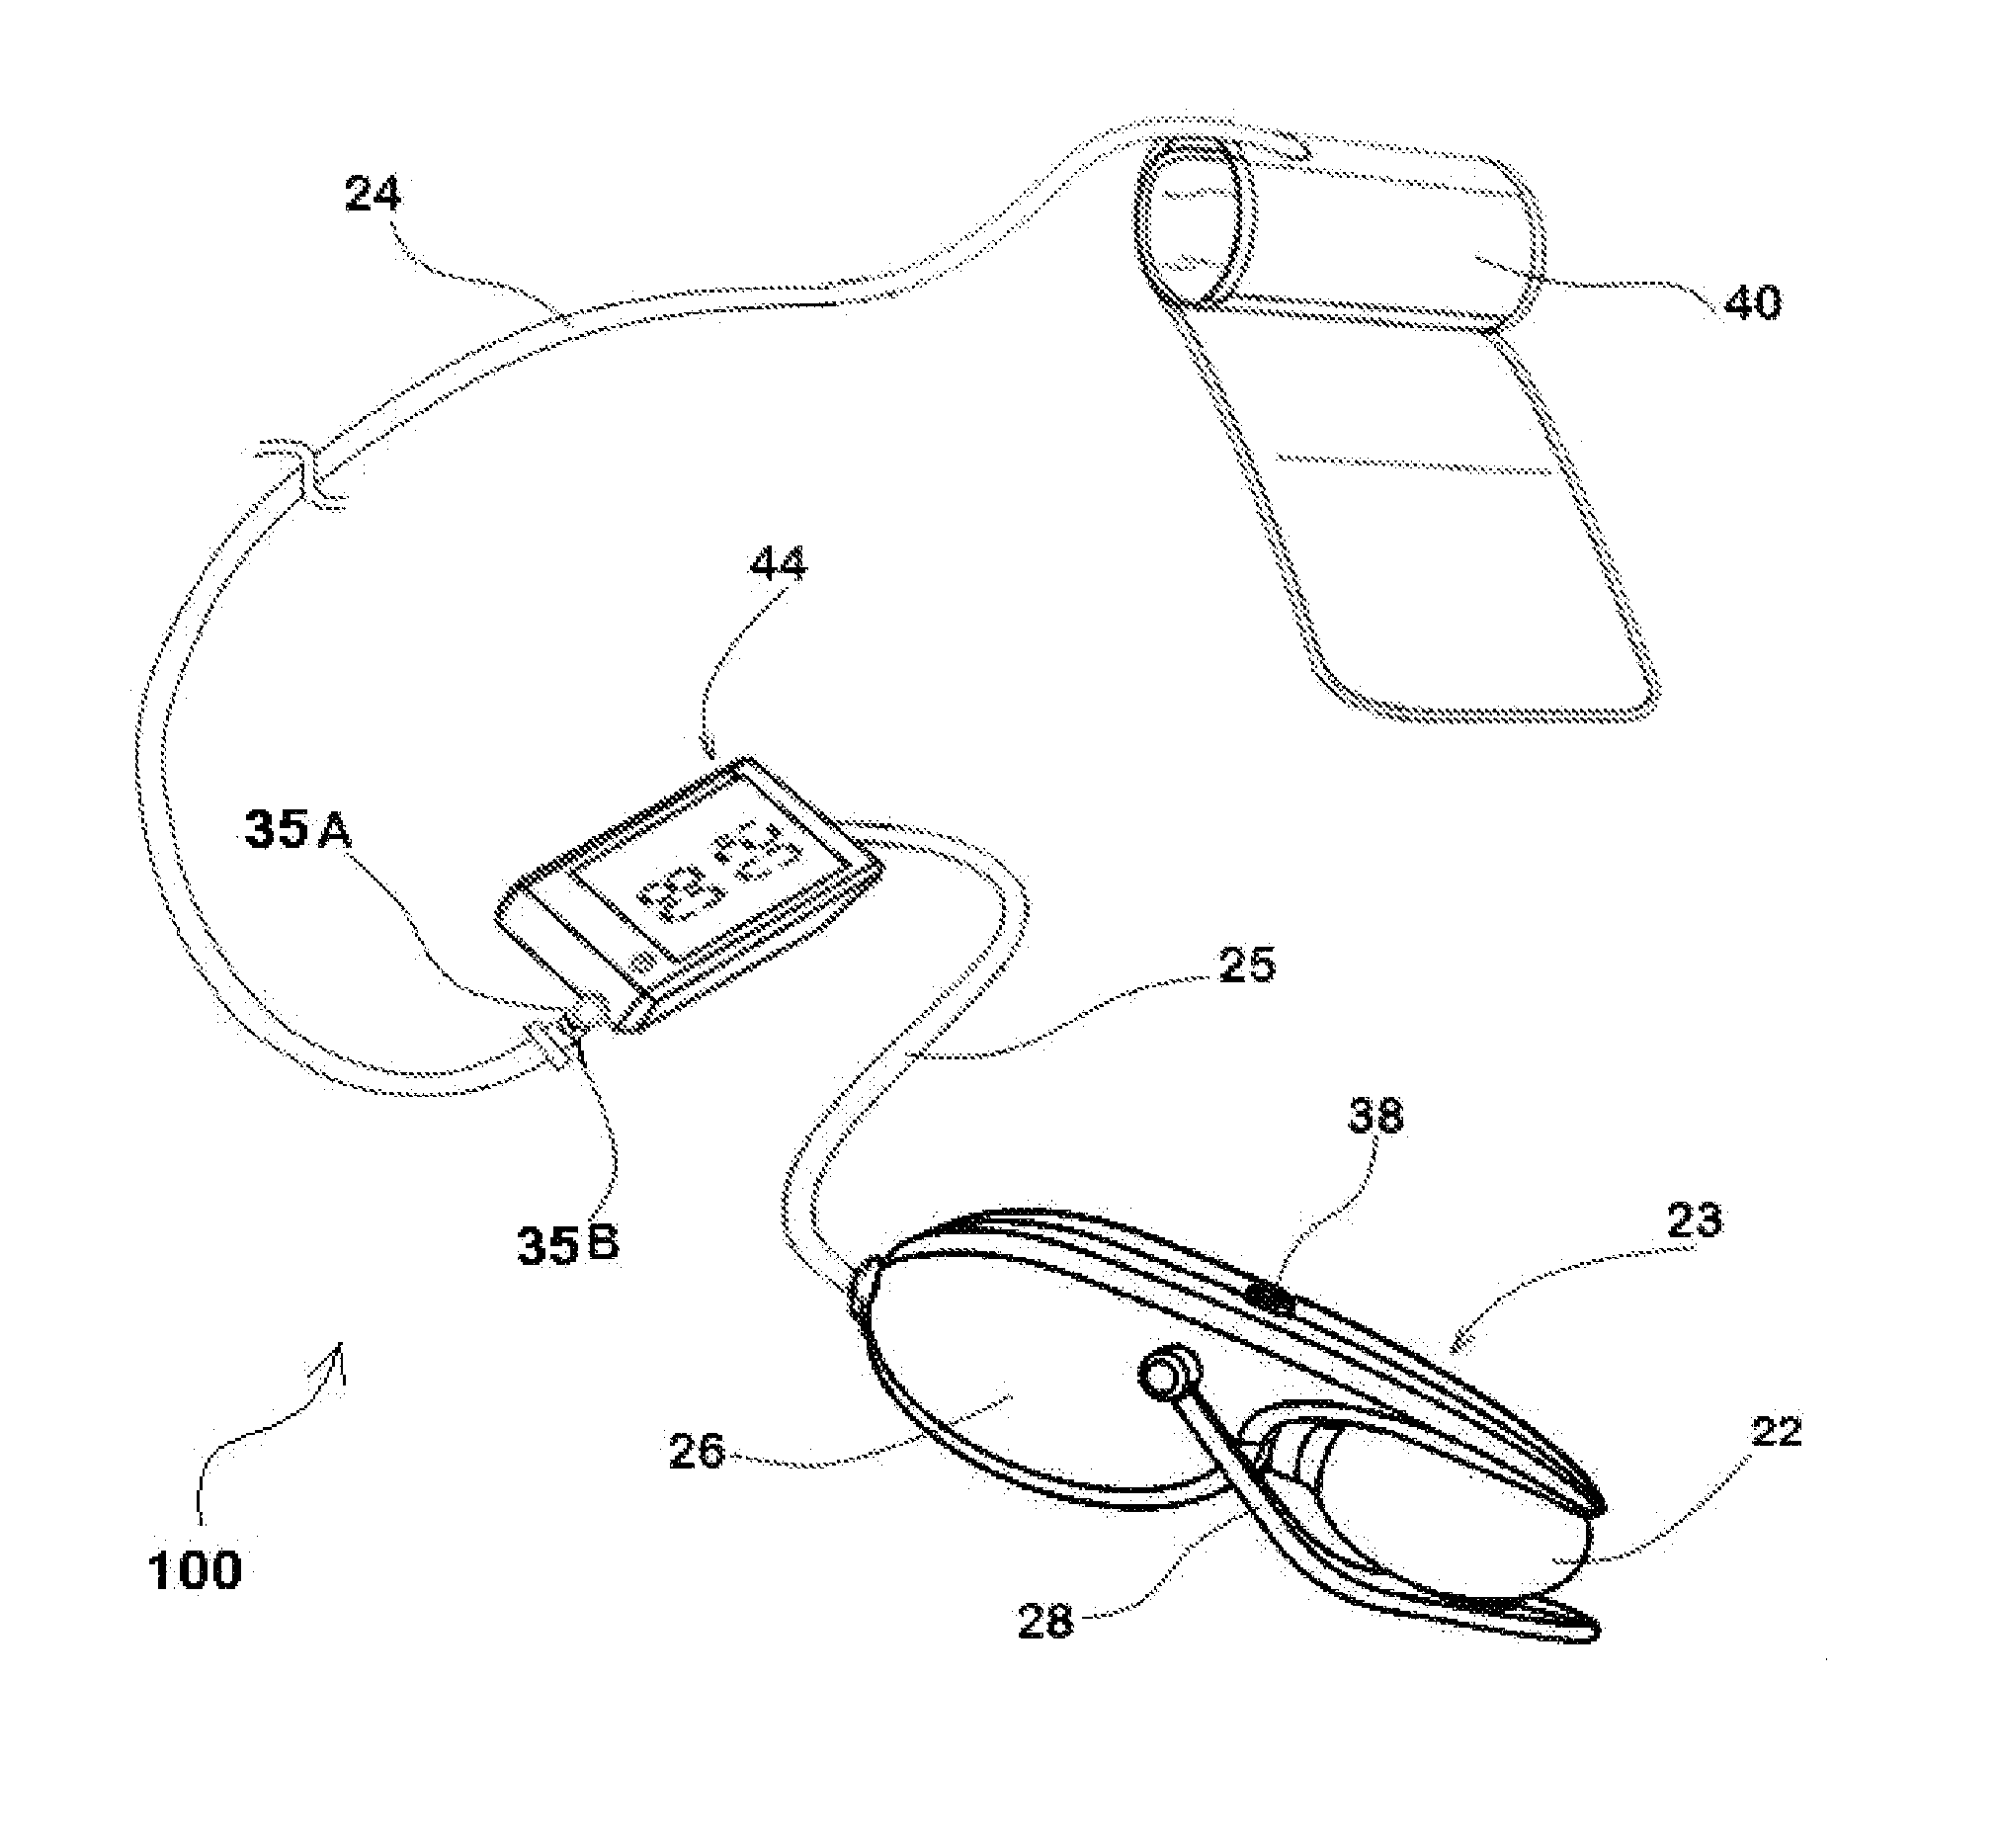 Apparatus and method for battery-free blood pressure monitor